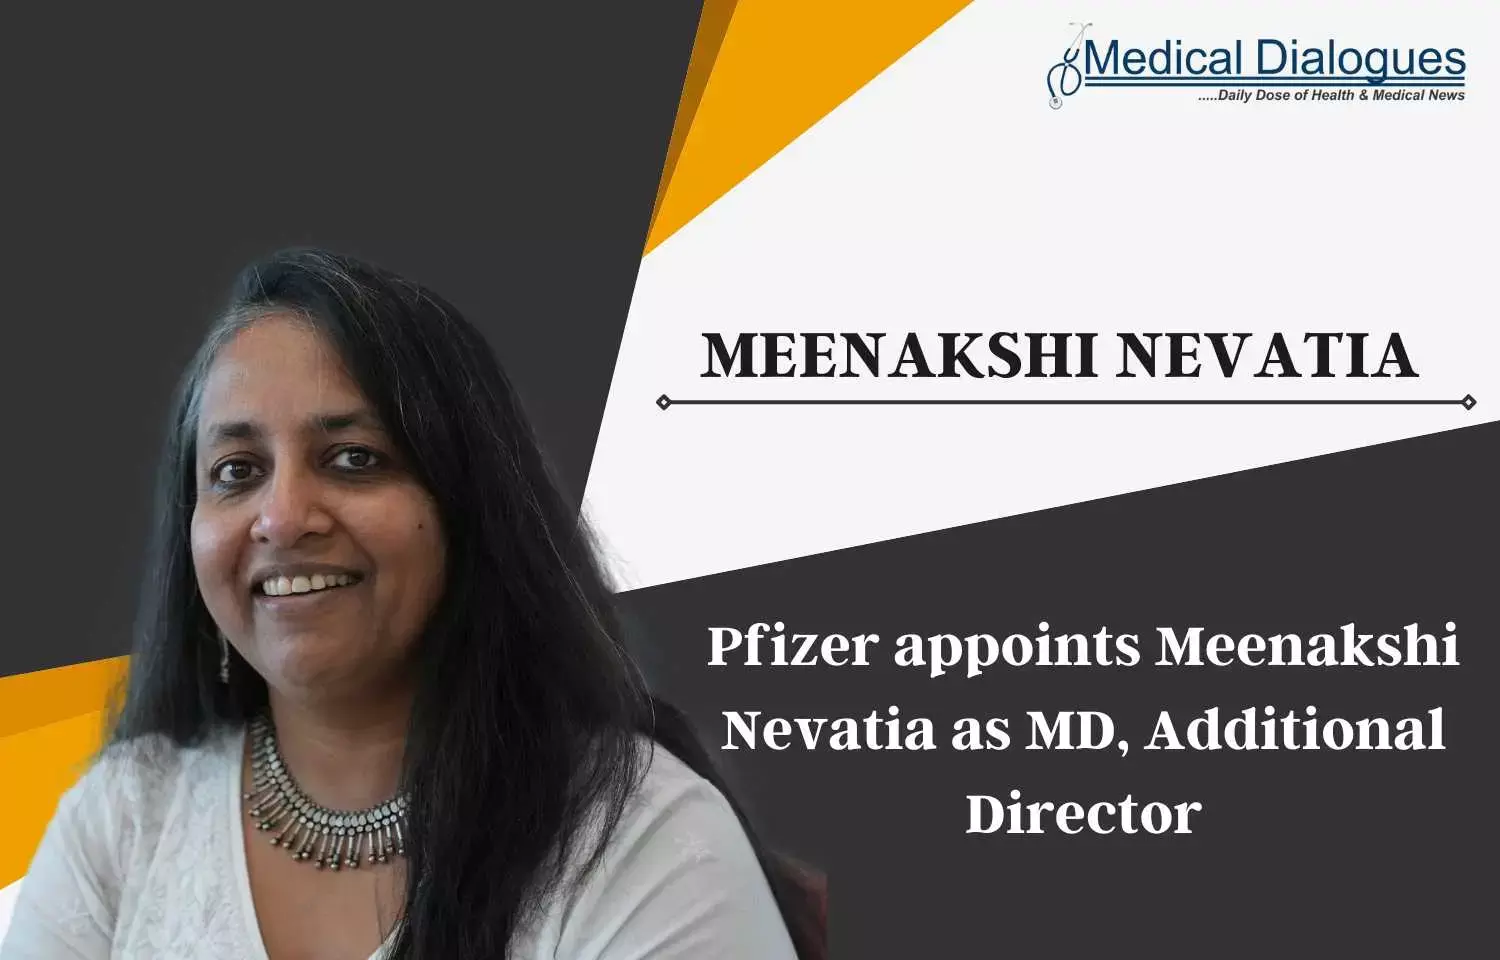 Pfizer ropes in Meenakshi Nevatia as MD, Additional Director